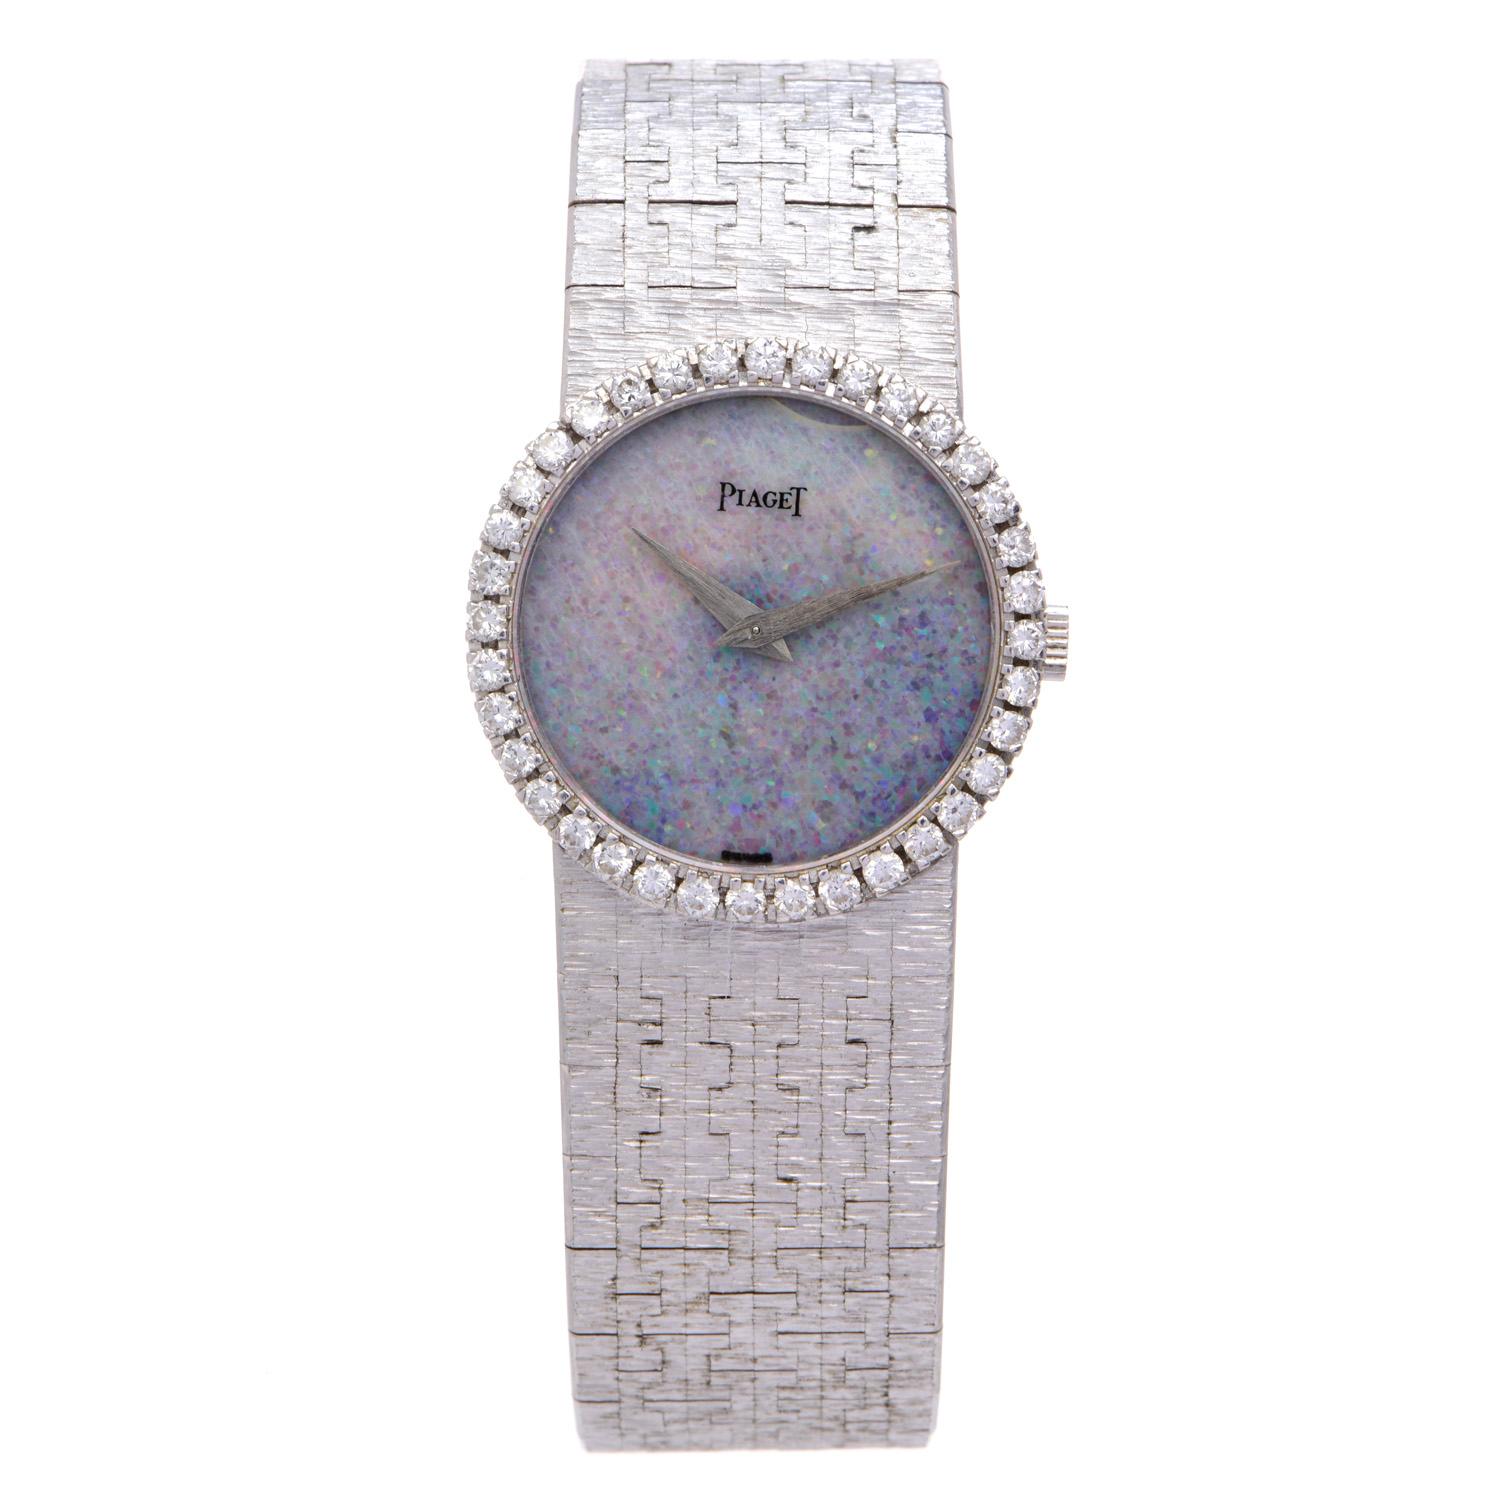 High quality Piaget's rarest Opal Dial Luxury Boutique Vintage Watch, 

Featuring sparkle diamond bezel, with (35) Round Cut Diamonds, weighing 0.70 carats, Exquisite genuine Opal dial, and integrated bracelet with a fold-over clasp.

All parts are